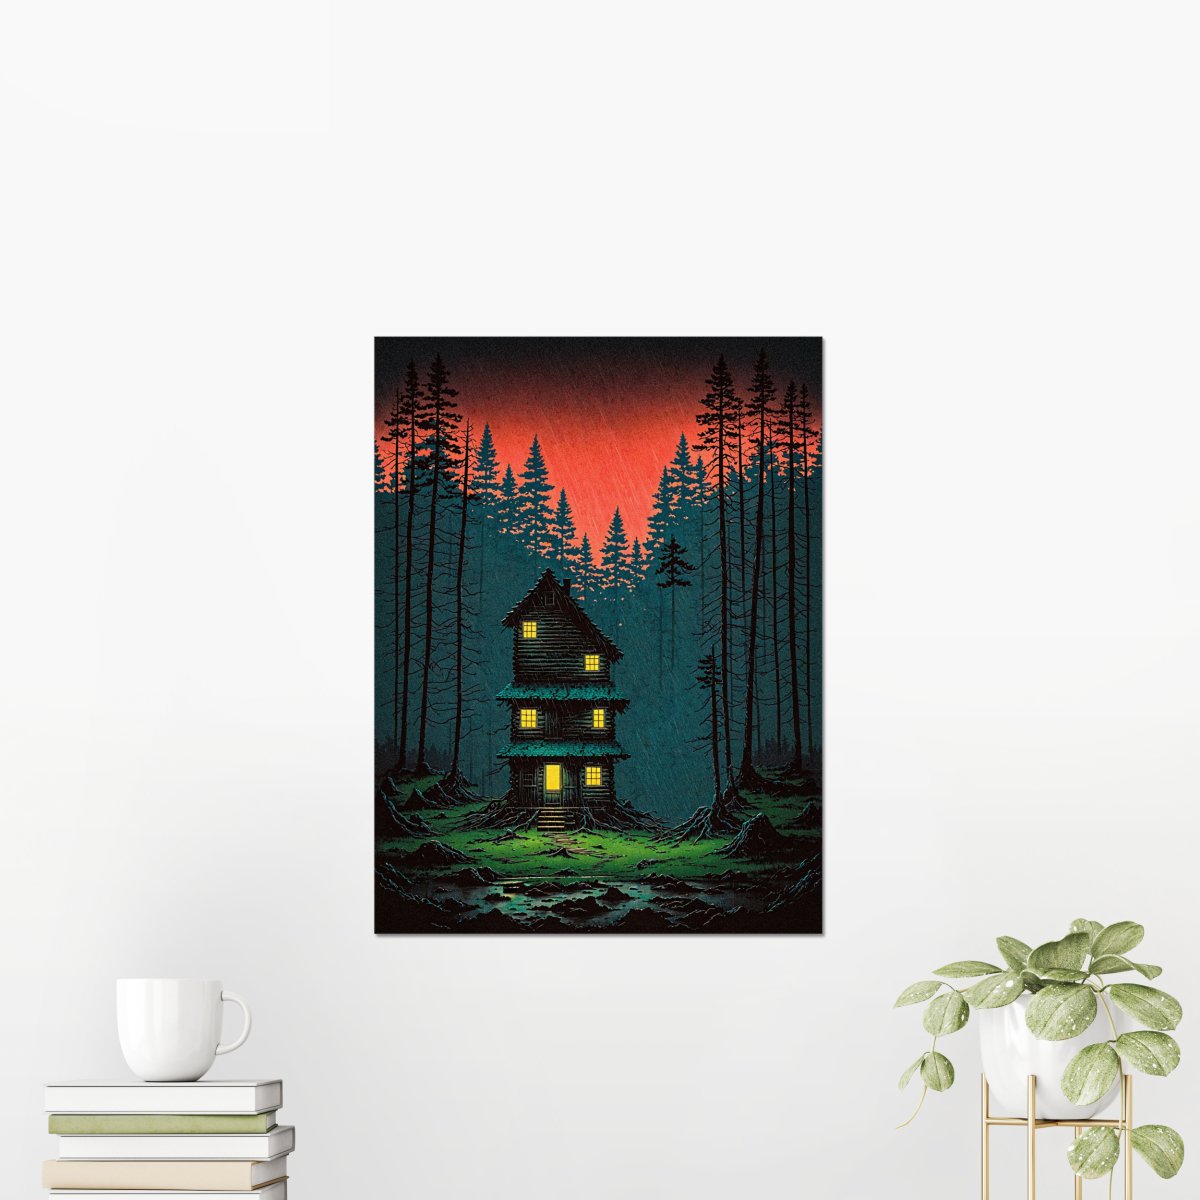 Inky nightmare - Art print - Poster - Ever colorful